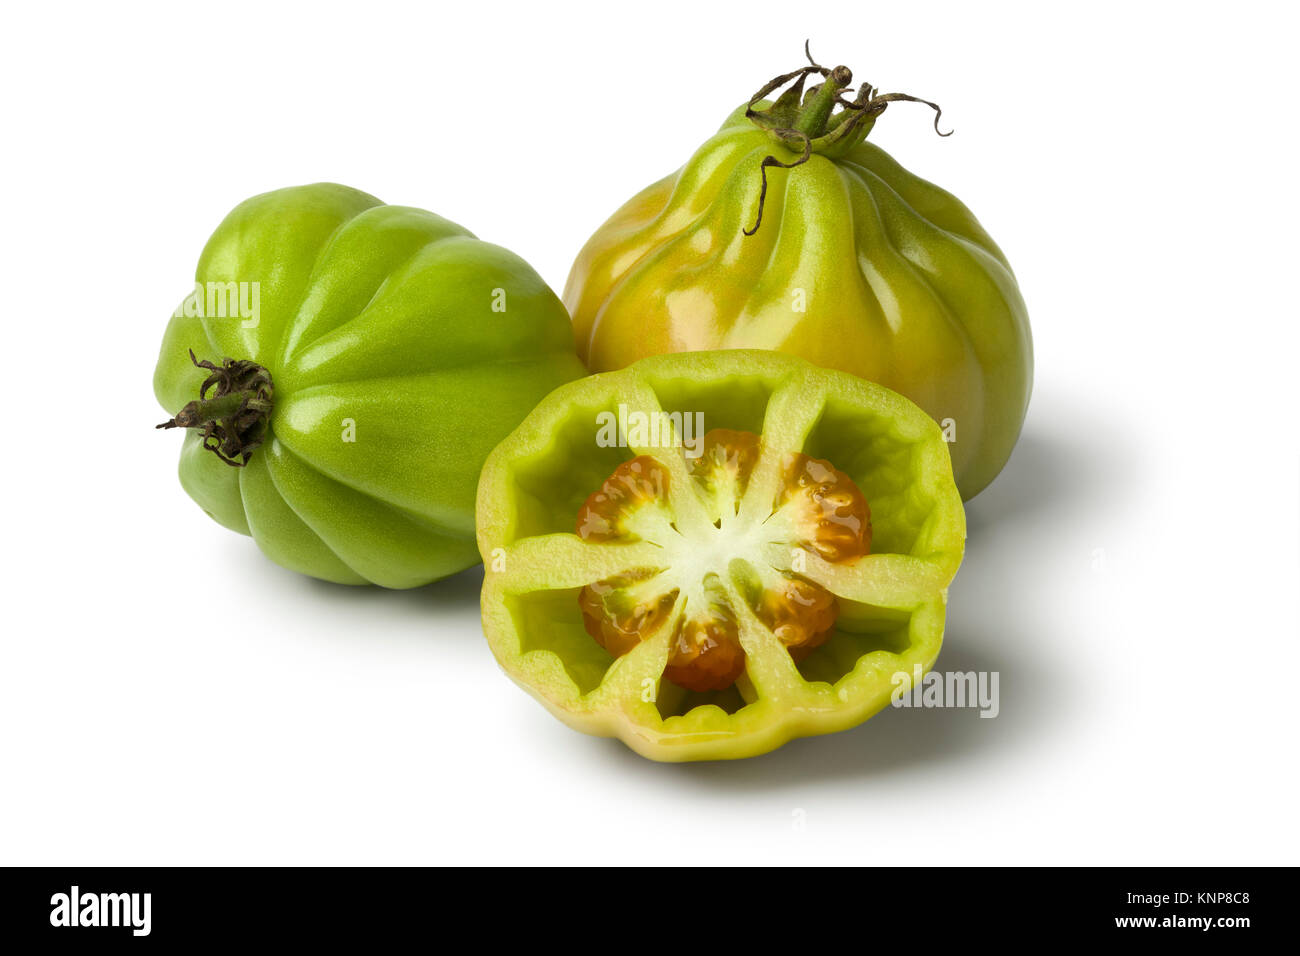 Whole and half green Coeur de boeuf tomatoes on white background Stock Photo